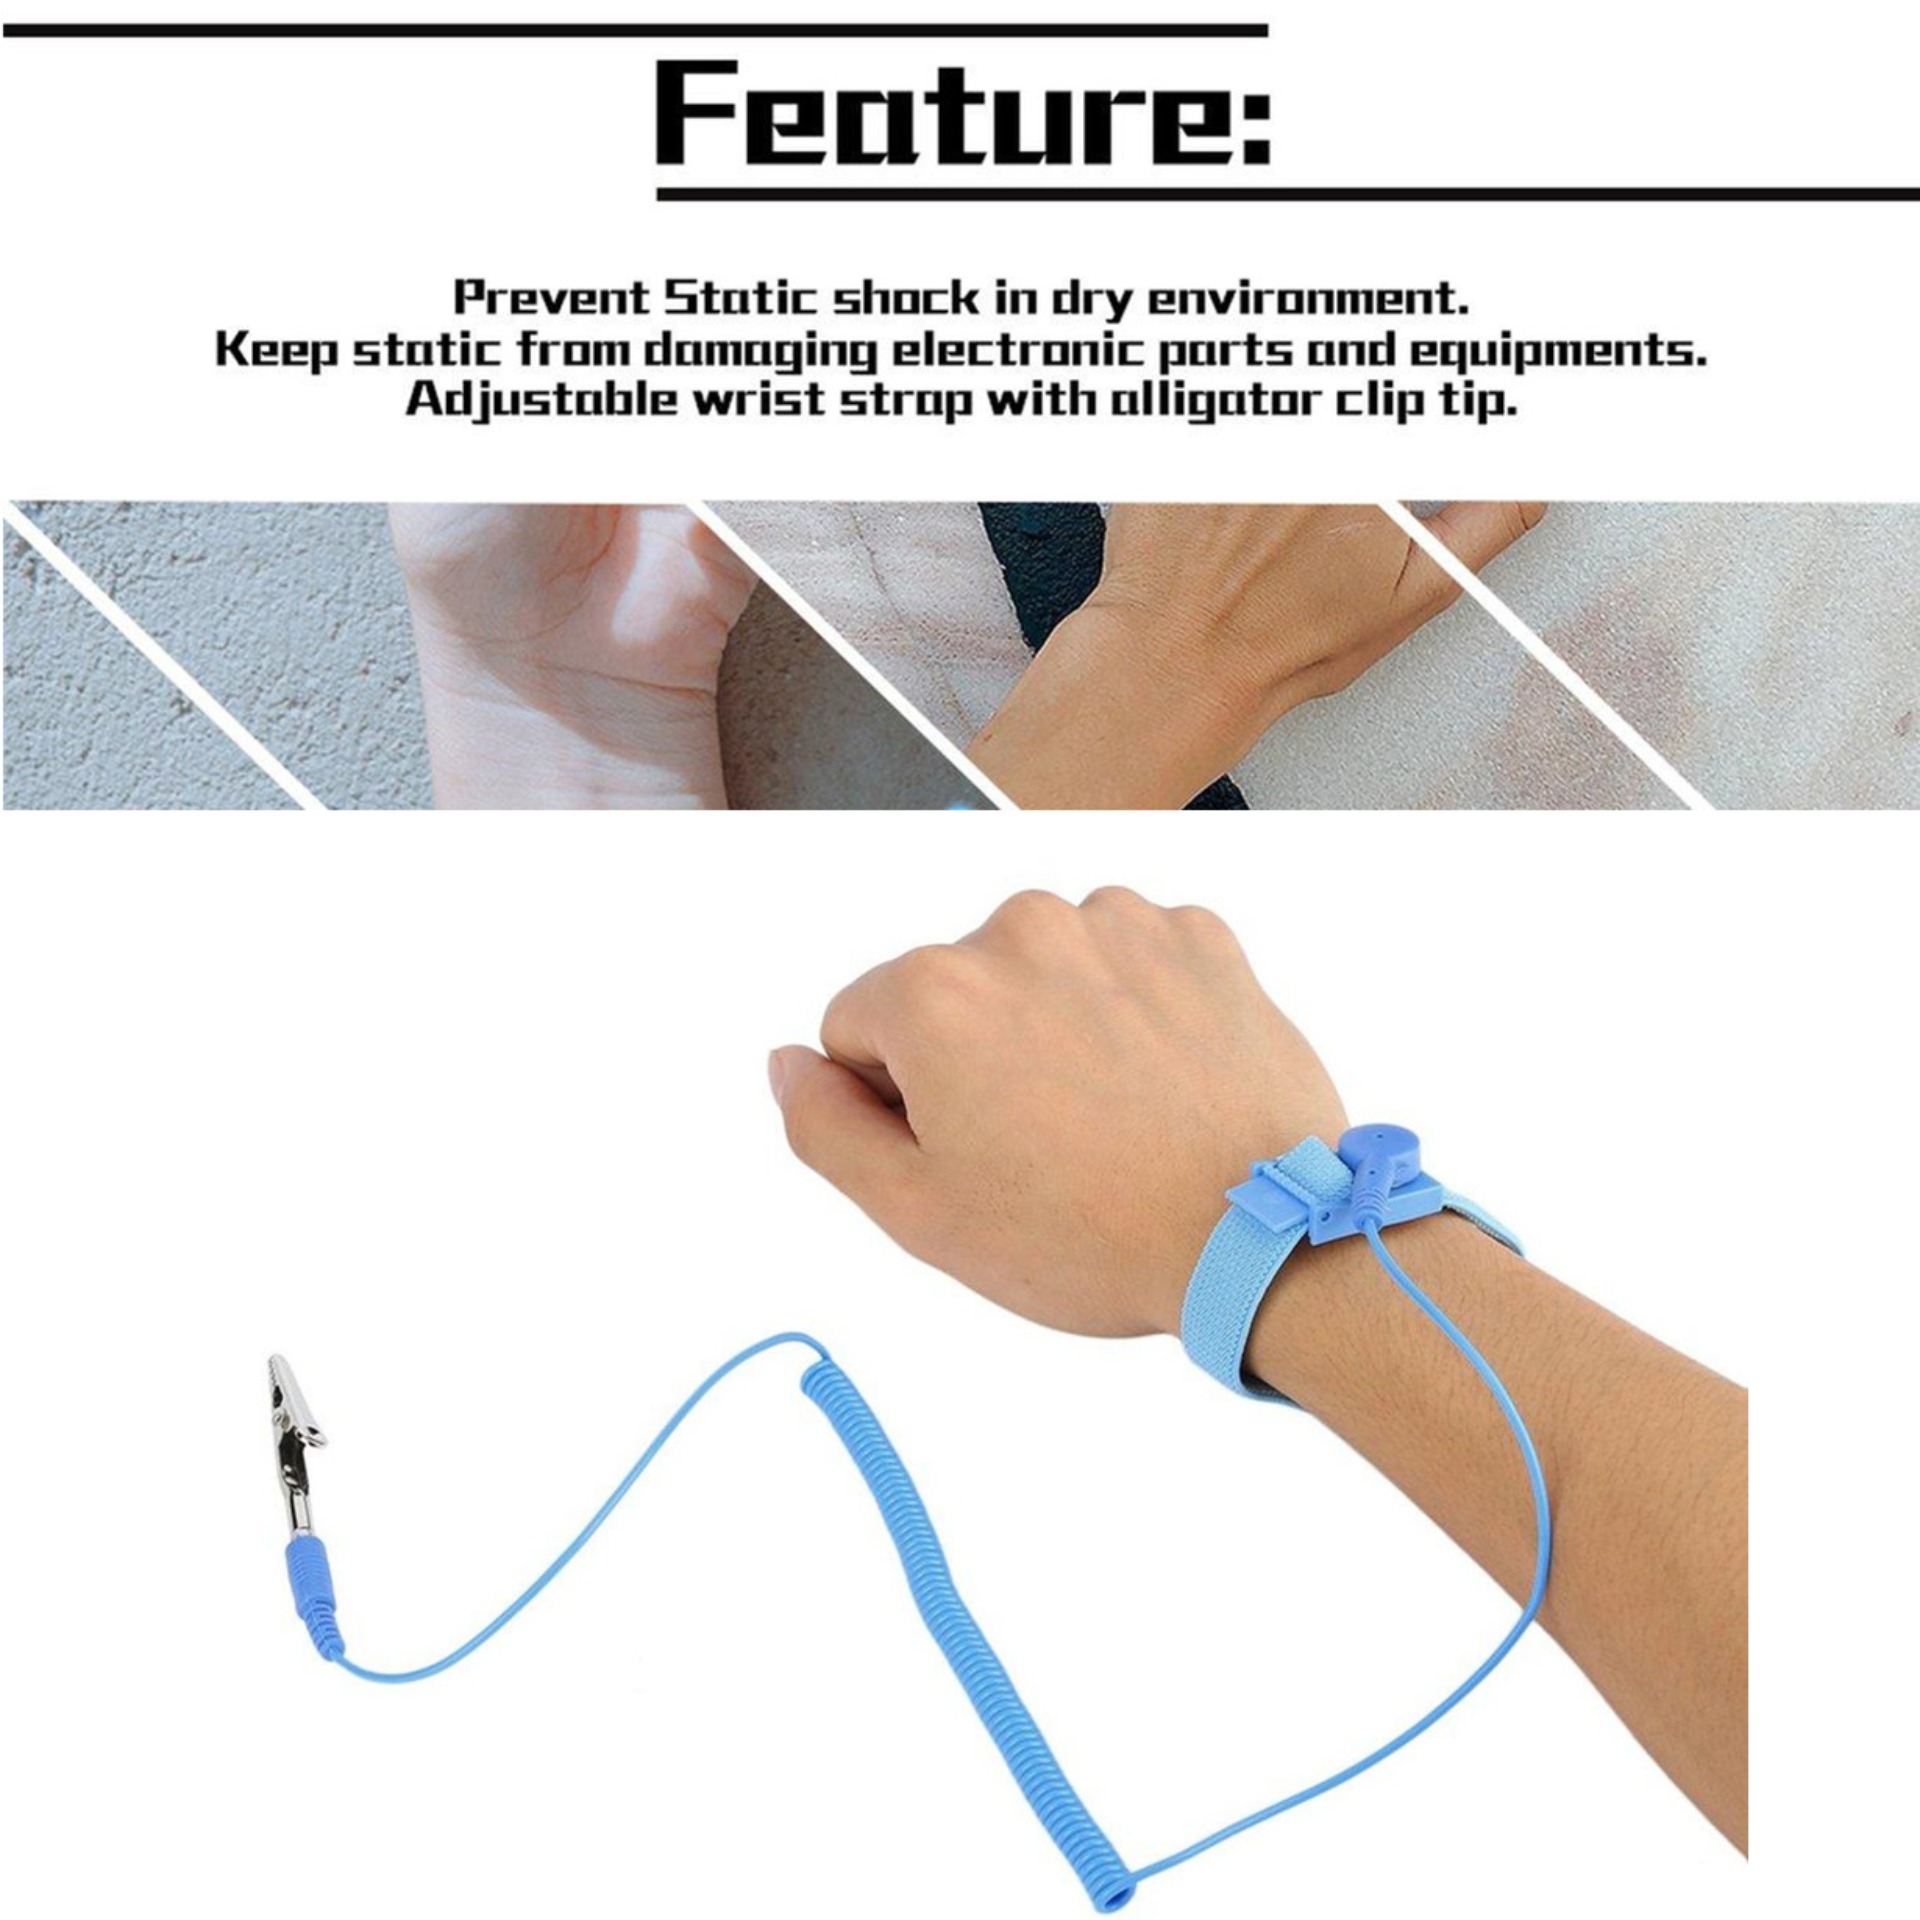 Anti Static ESD Wrist Strap Discharge Band Grounding Prevent Static Shock New 